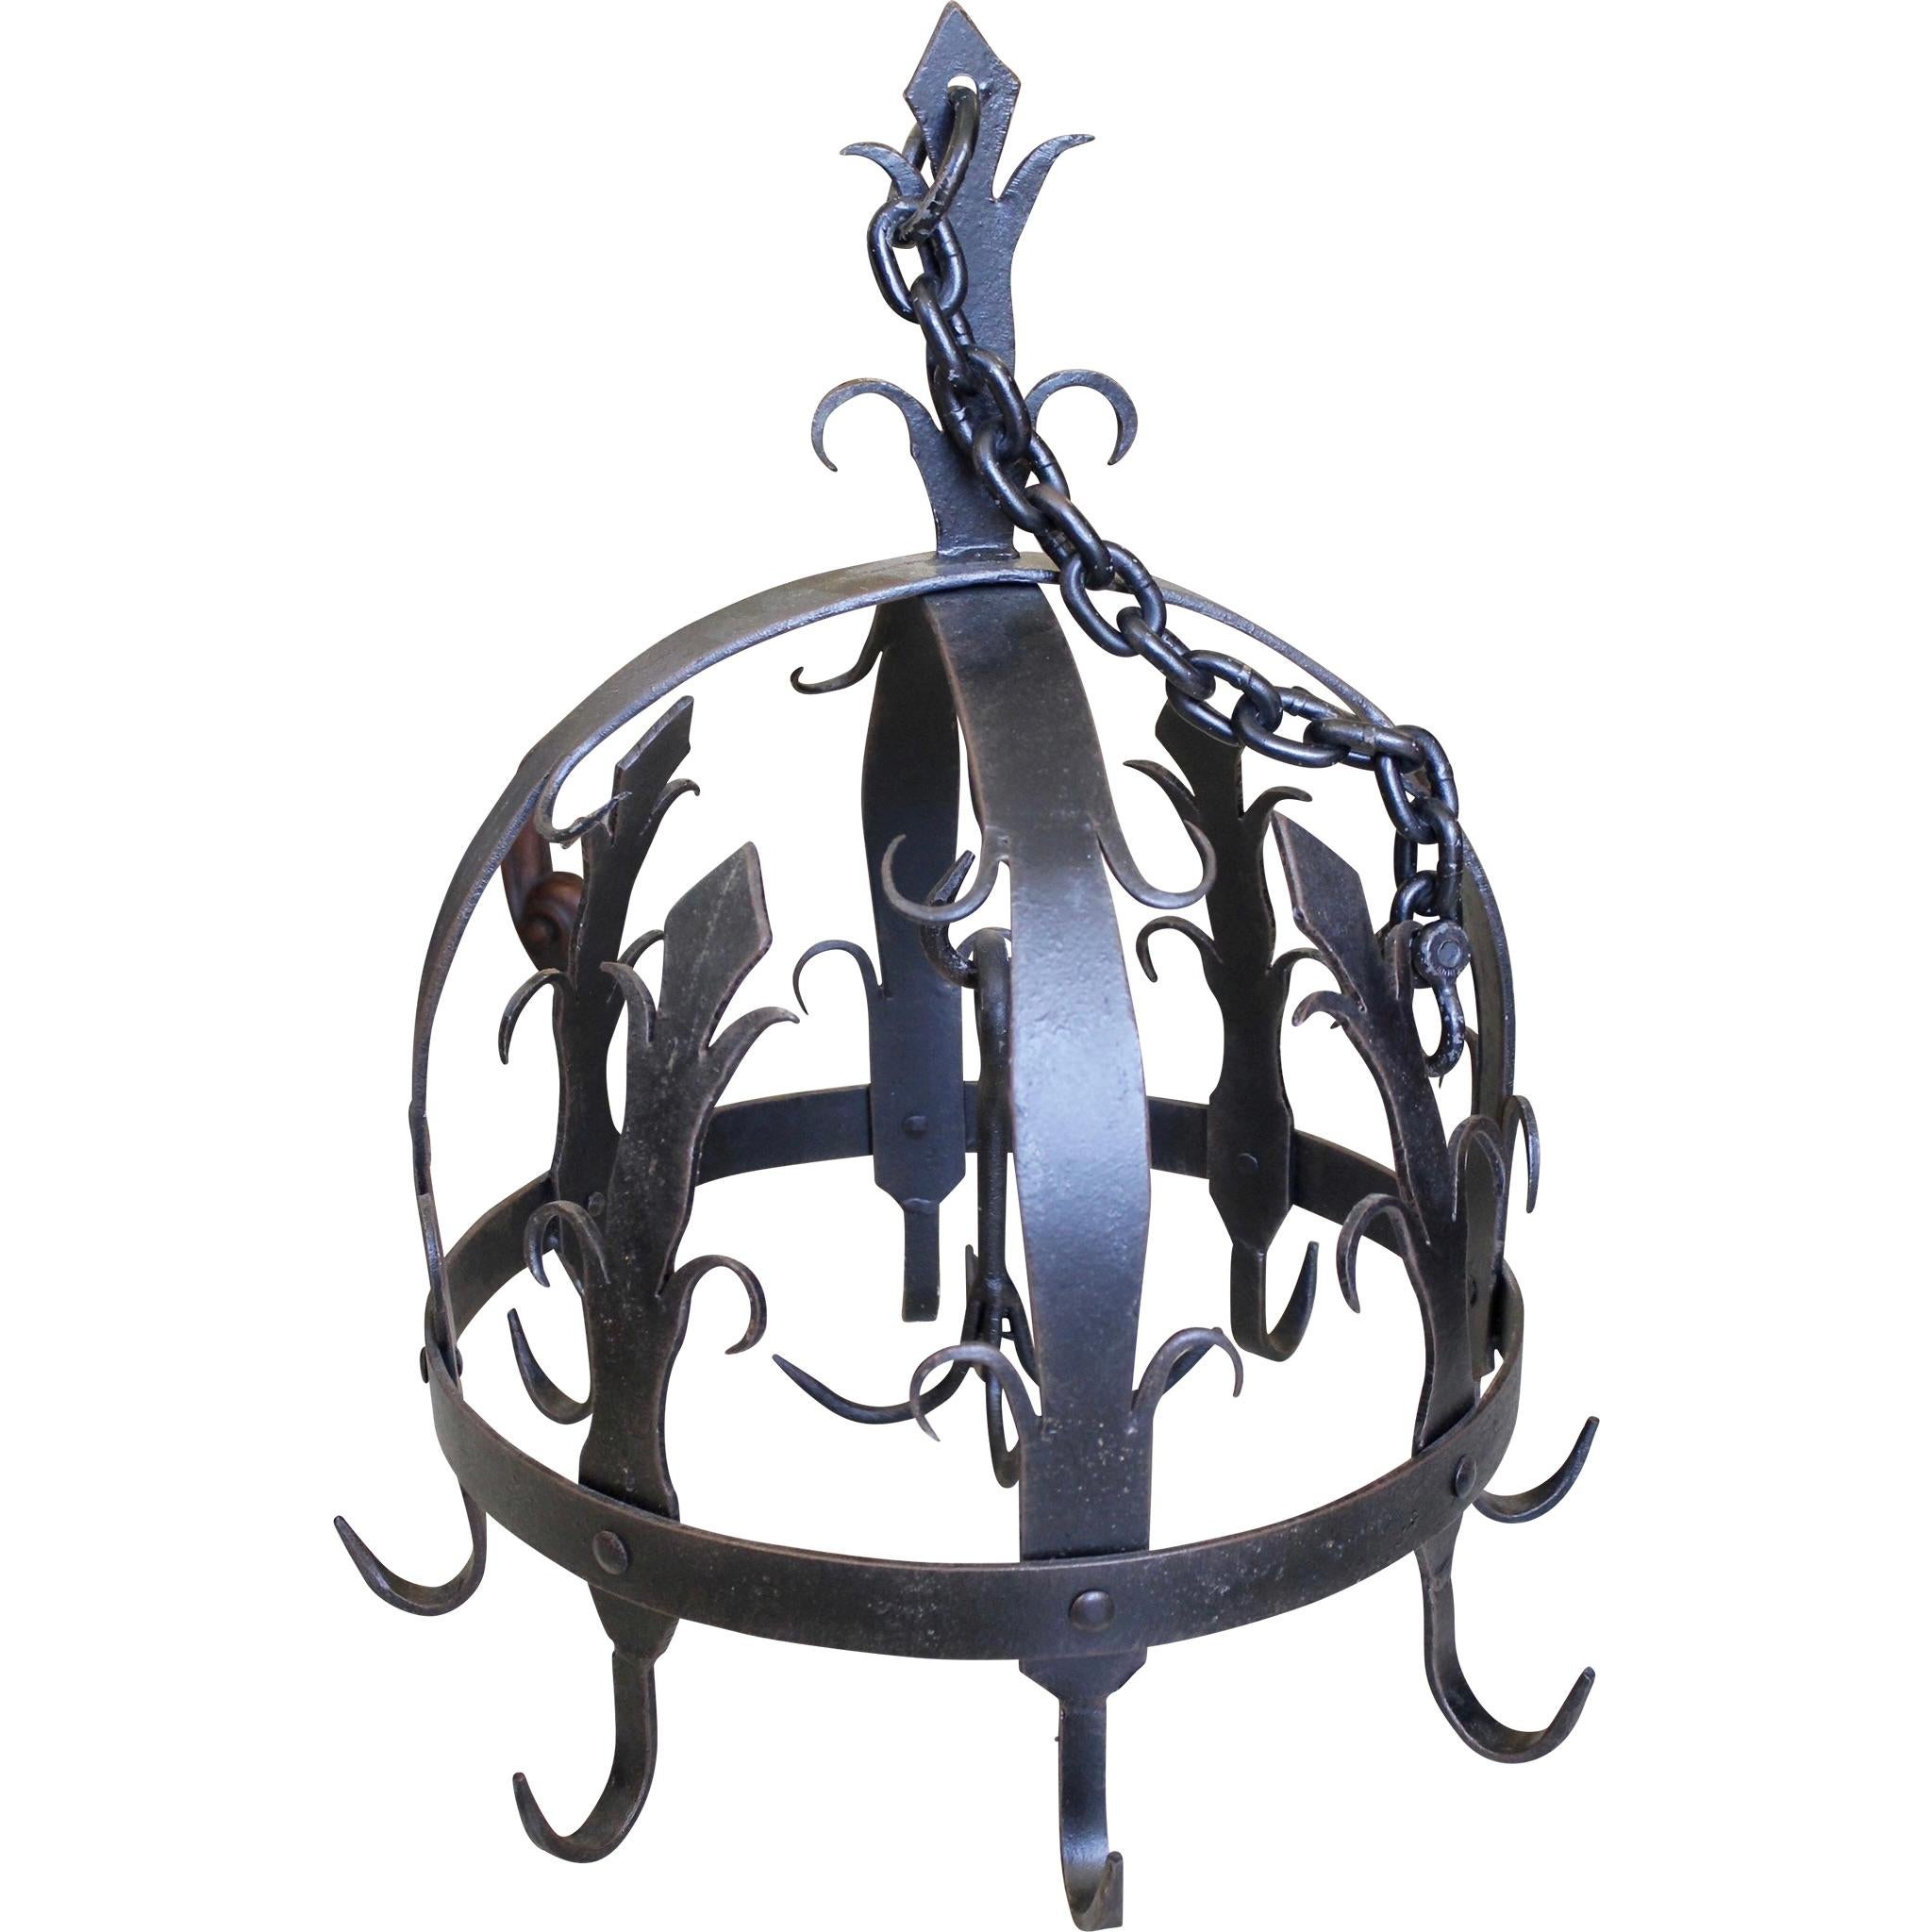 Forged Ornamental Wrought Iron Pot Rack Or Herb Drying Rack For Sale